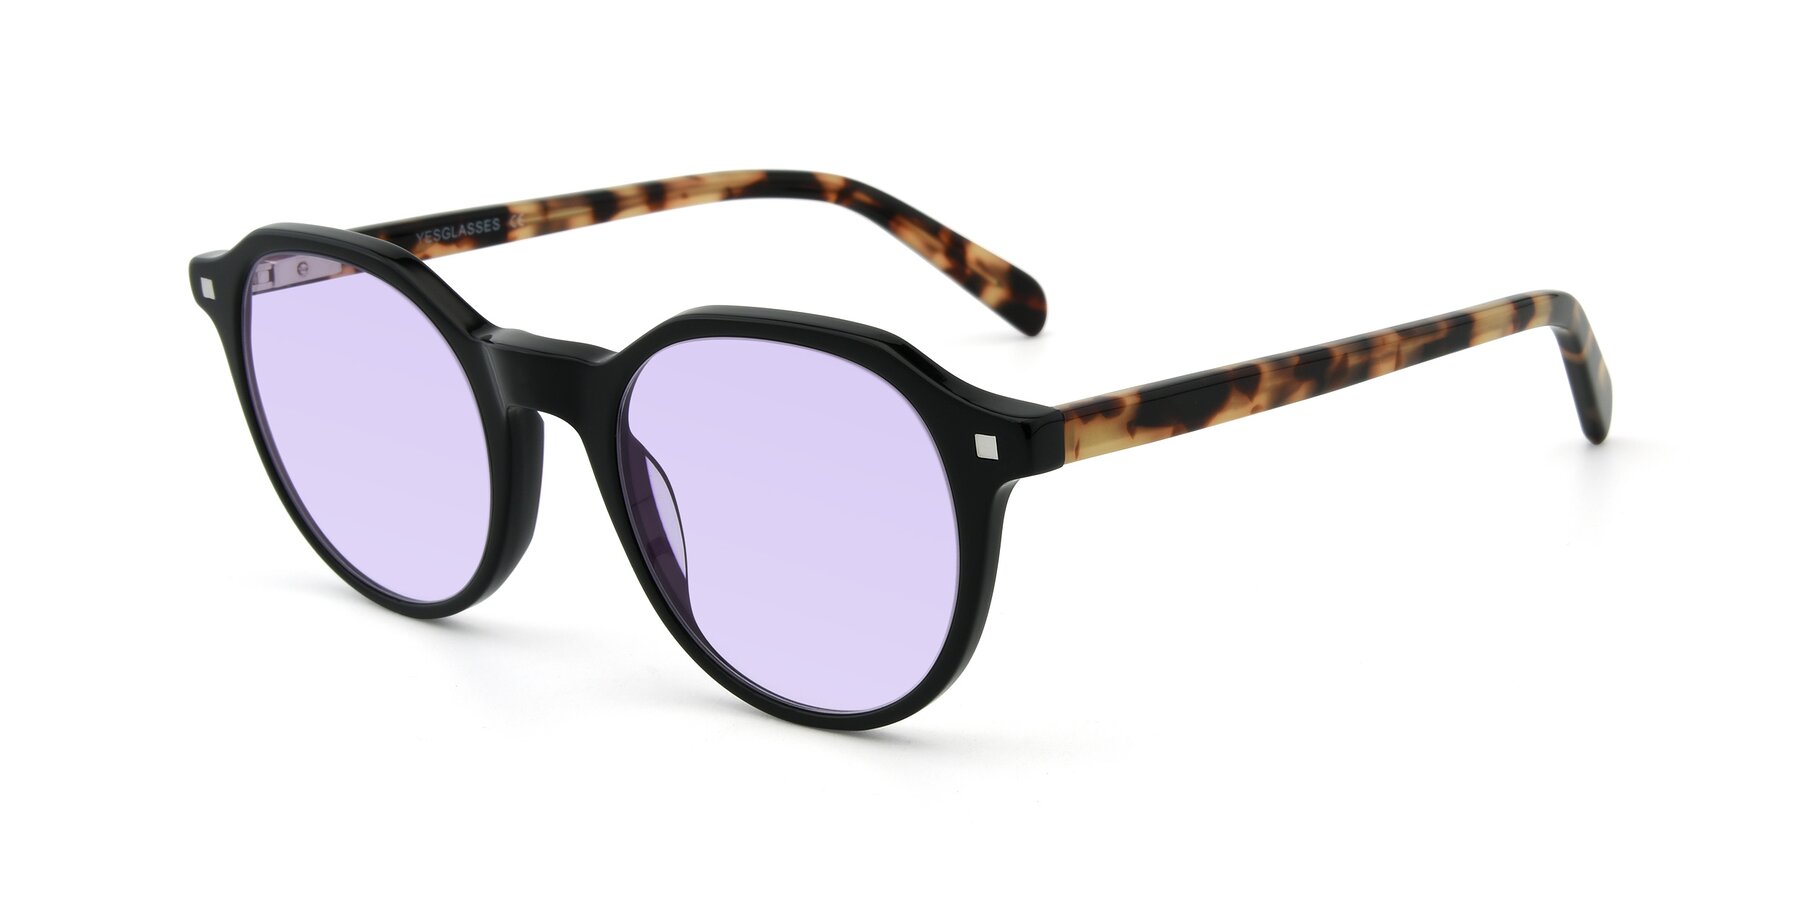 Angle of 17425 in Black with Light Purple Tinted Lenses